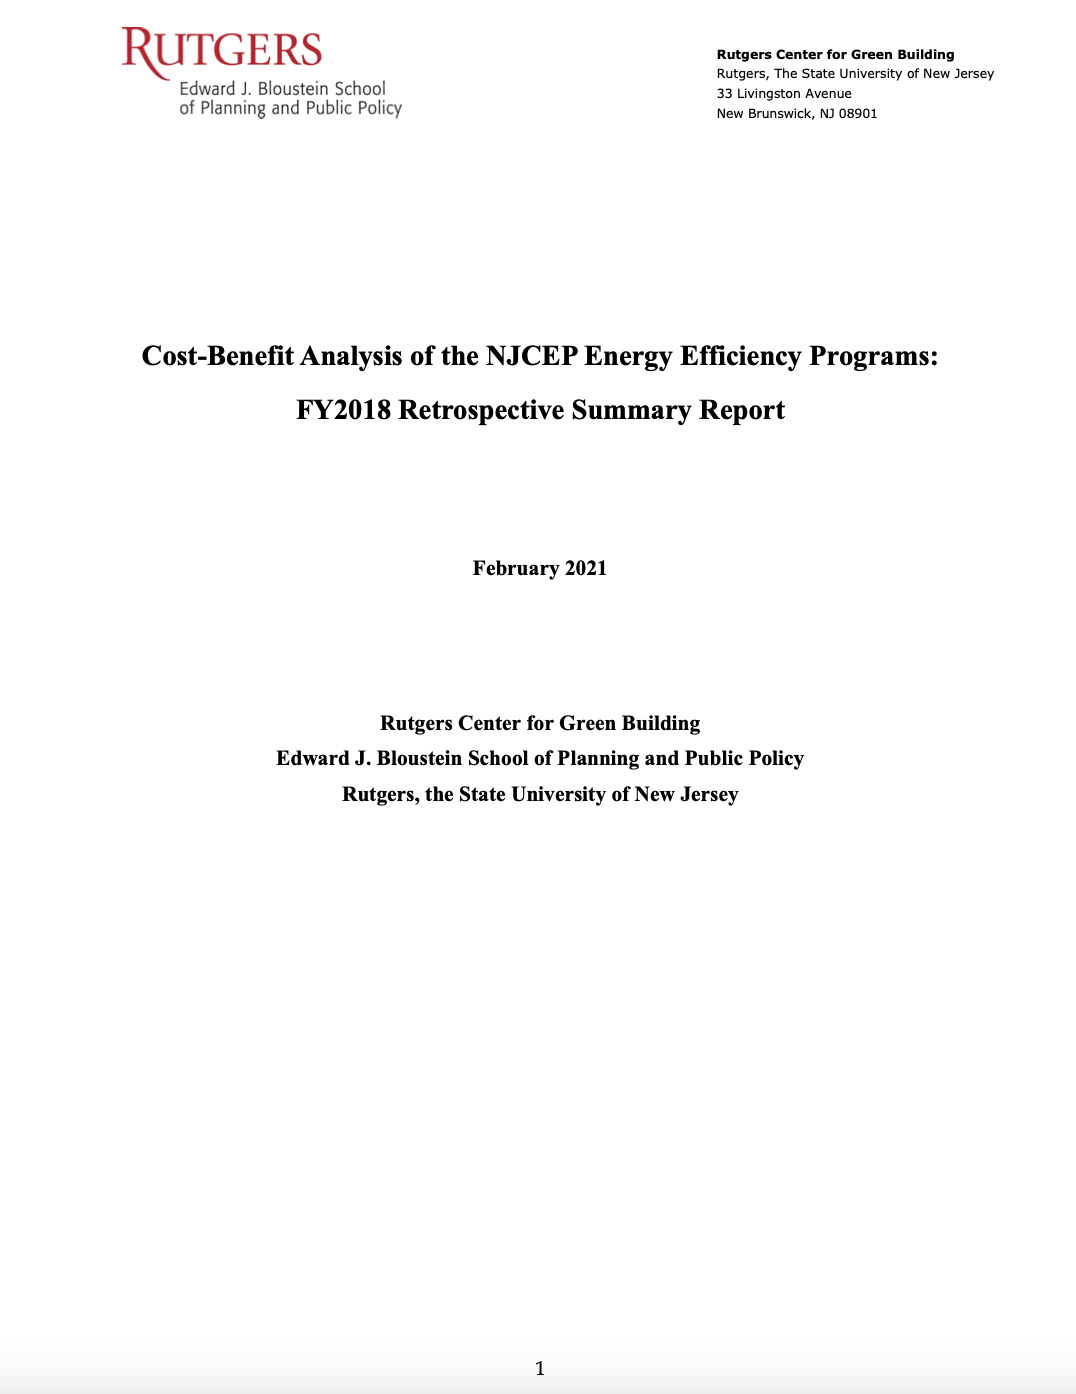 Cost-Benefit Analysis of the NJCEP Energy Efficiency Programs